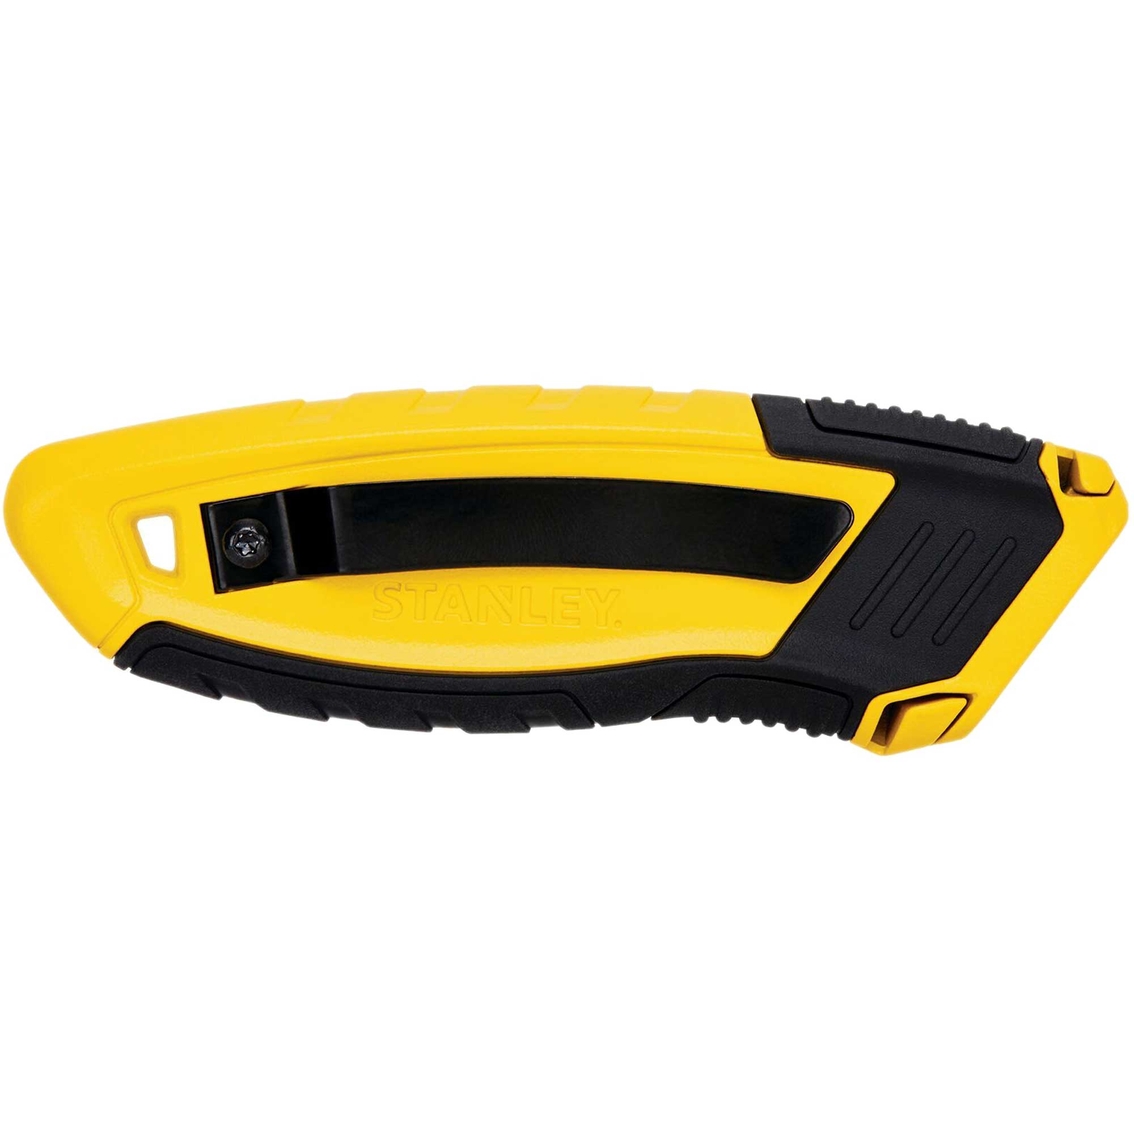 Stanley Control Grip Retractable Utility Knife - Image 5 of 5